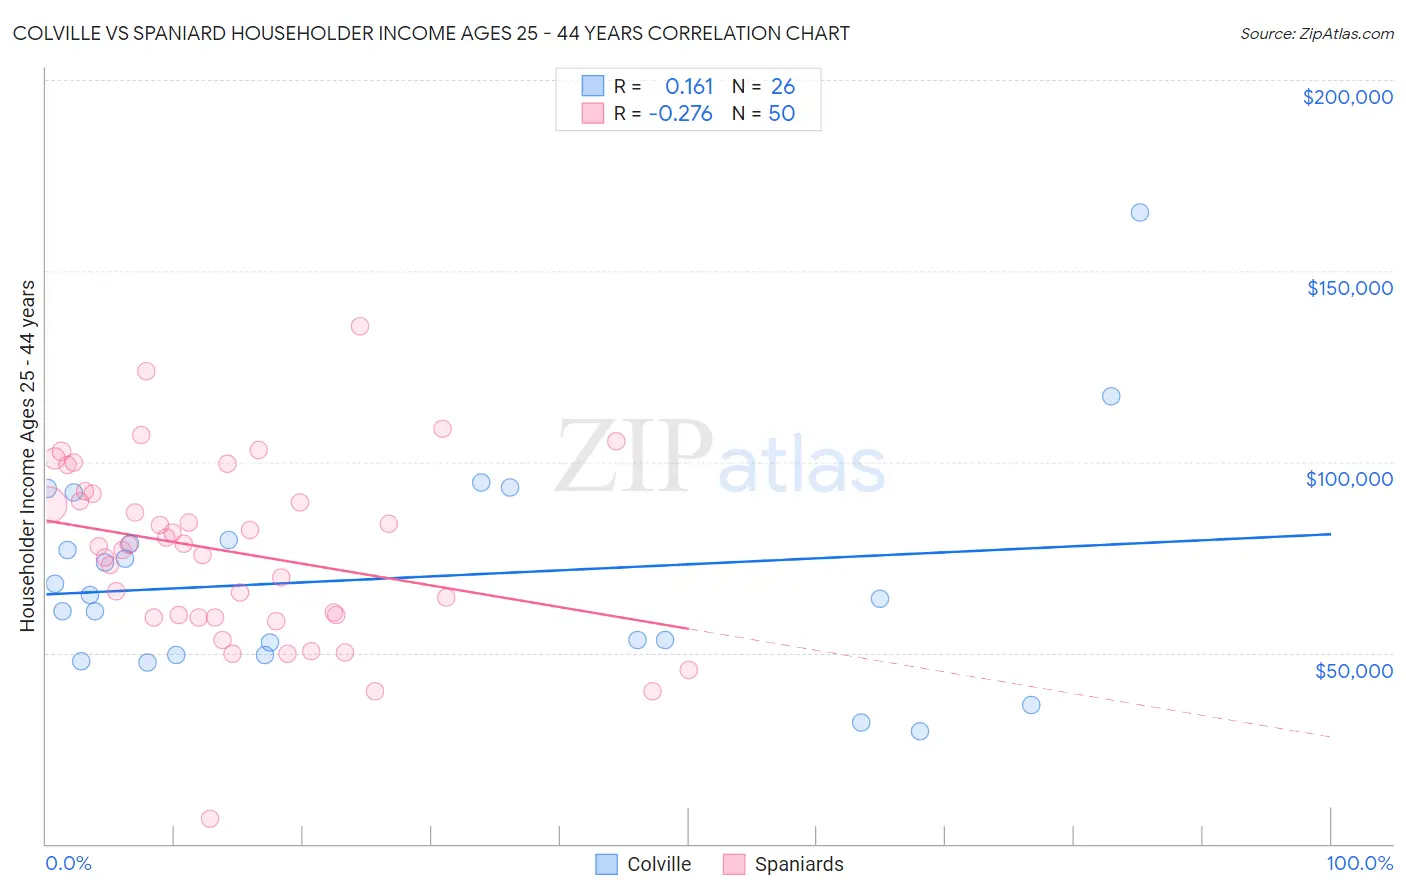 Colville vs Spaniard Householder Income Ages 25 - 44 years